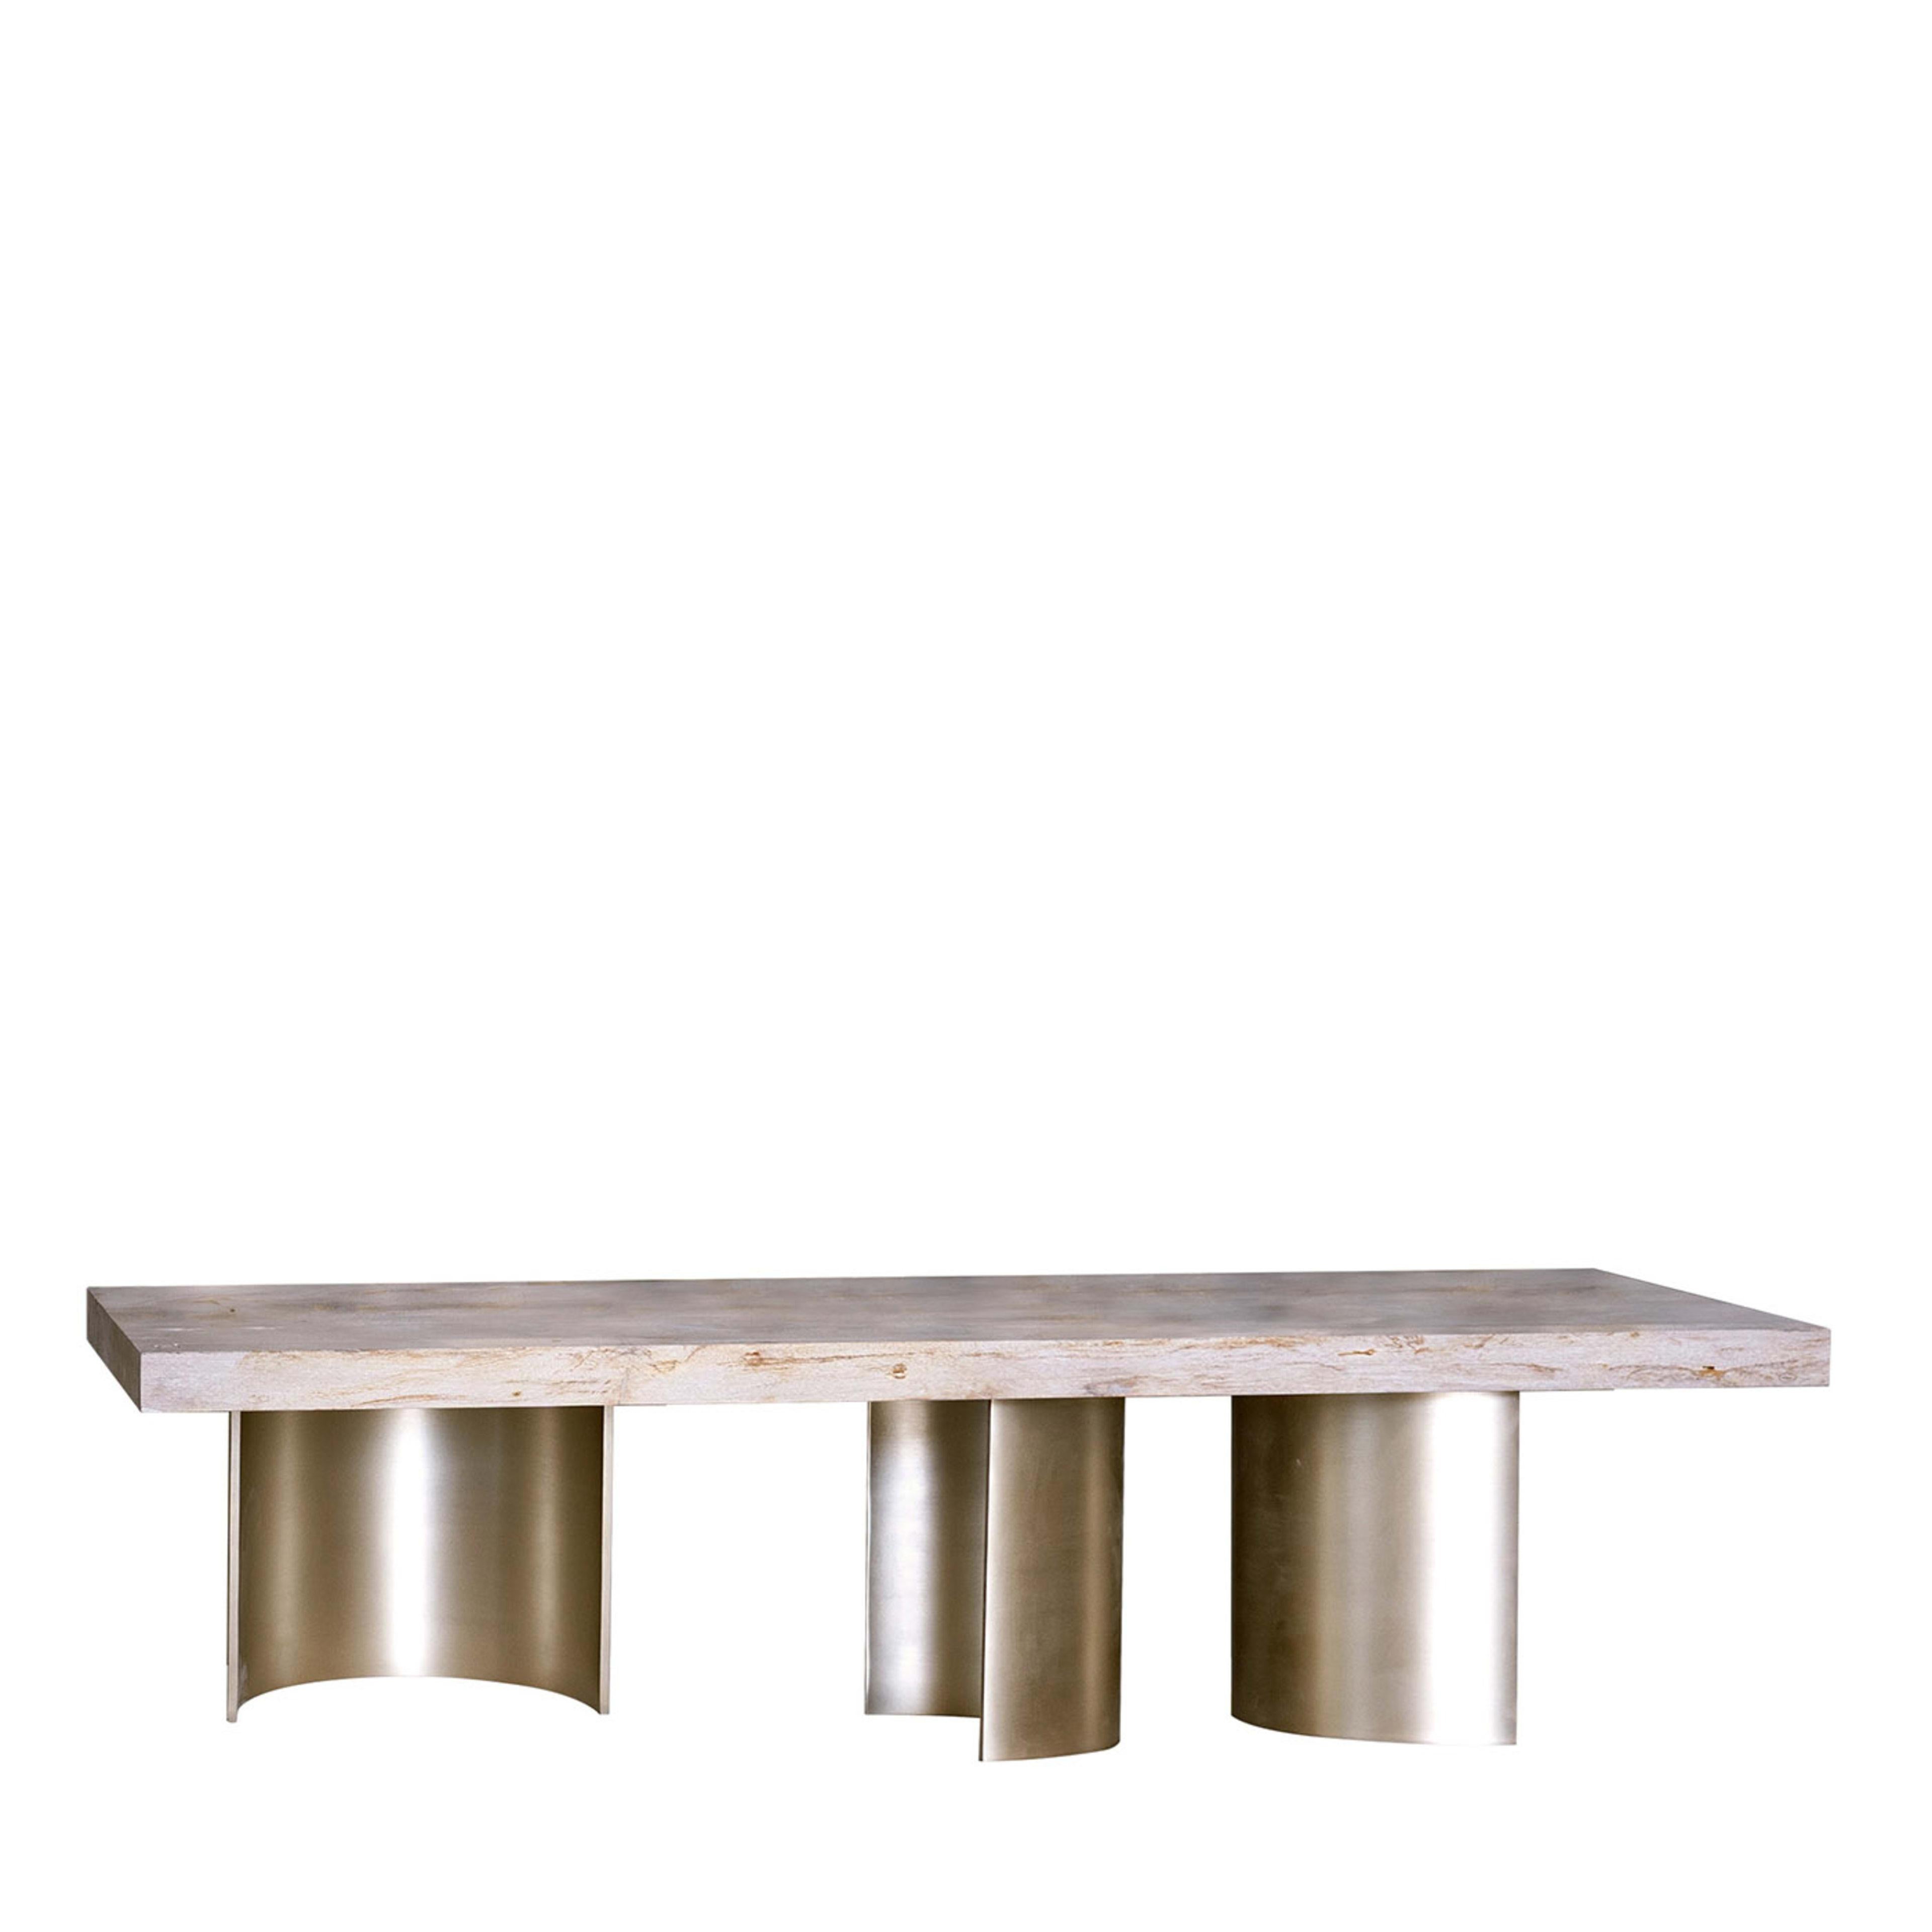 The trunk’s part identified as a “book” inspired the design of this coffee table. Slabs of petrified wood rest on curved metal surfaces. These semicircles are oriented at different angles, creating movement and dynamism in harmonious contrast with